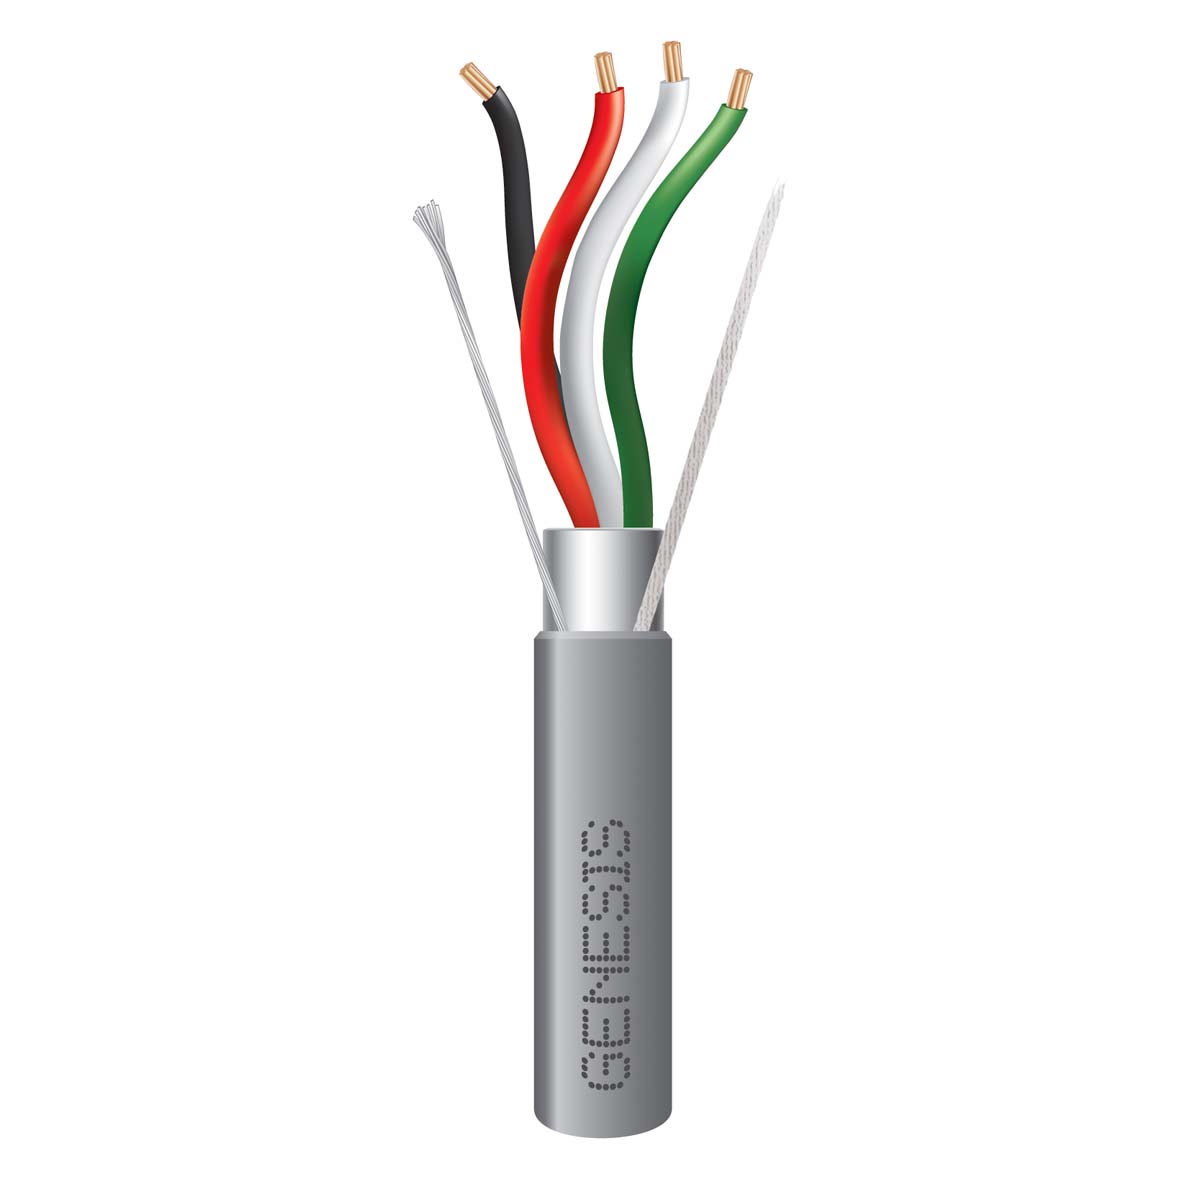 GENESIS CABLE | Cable 18/4 STR
OAS 1000&#39; PB Gray Riser Rated